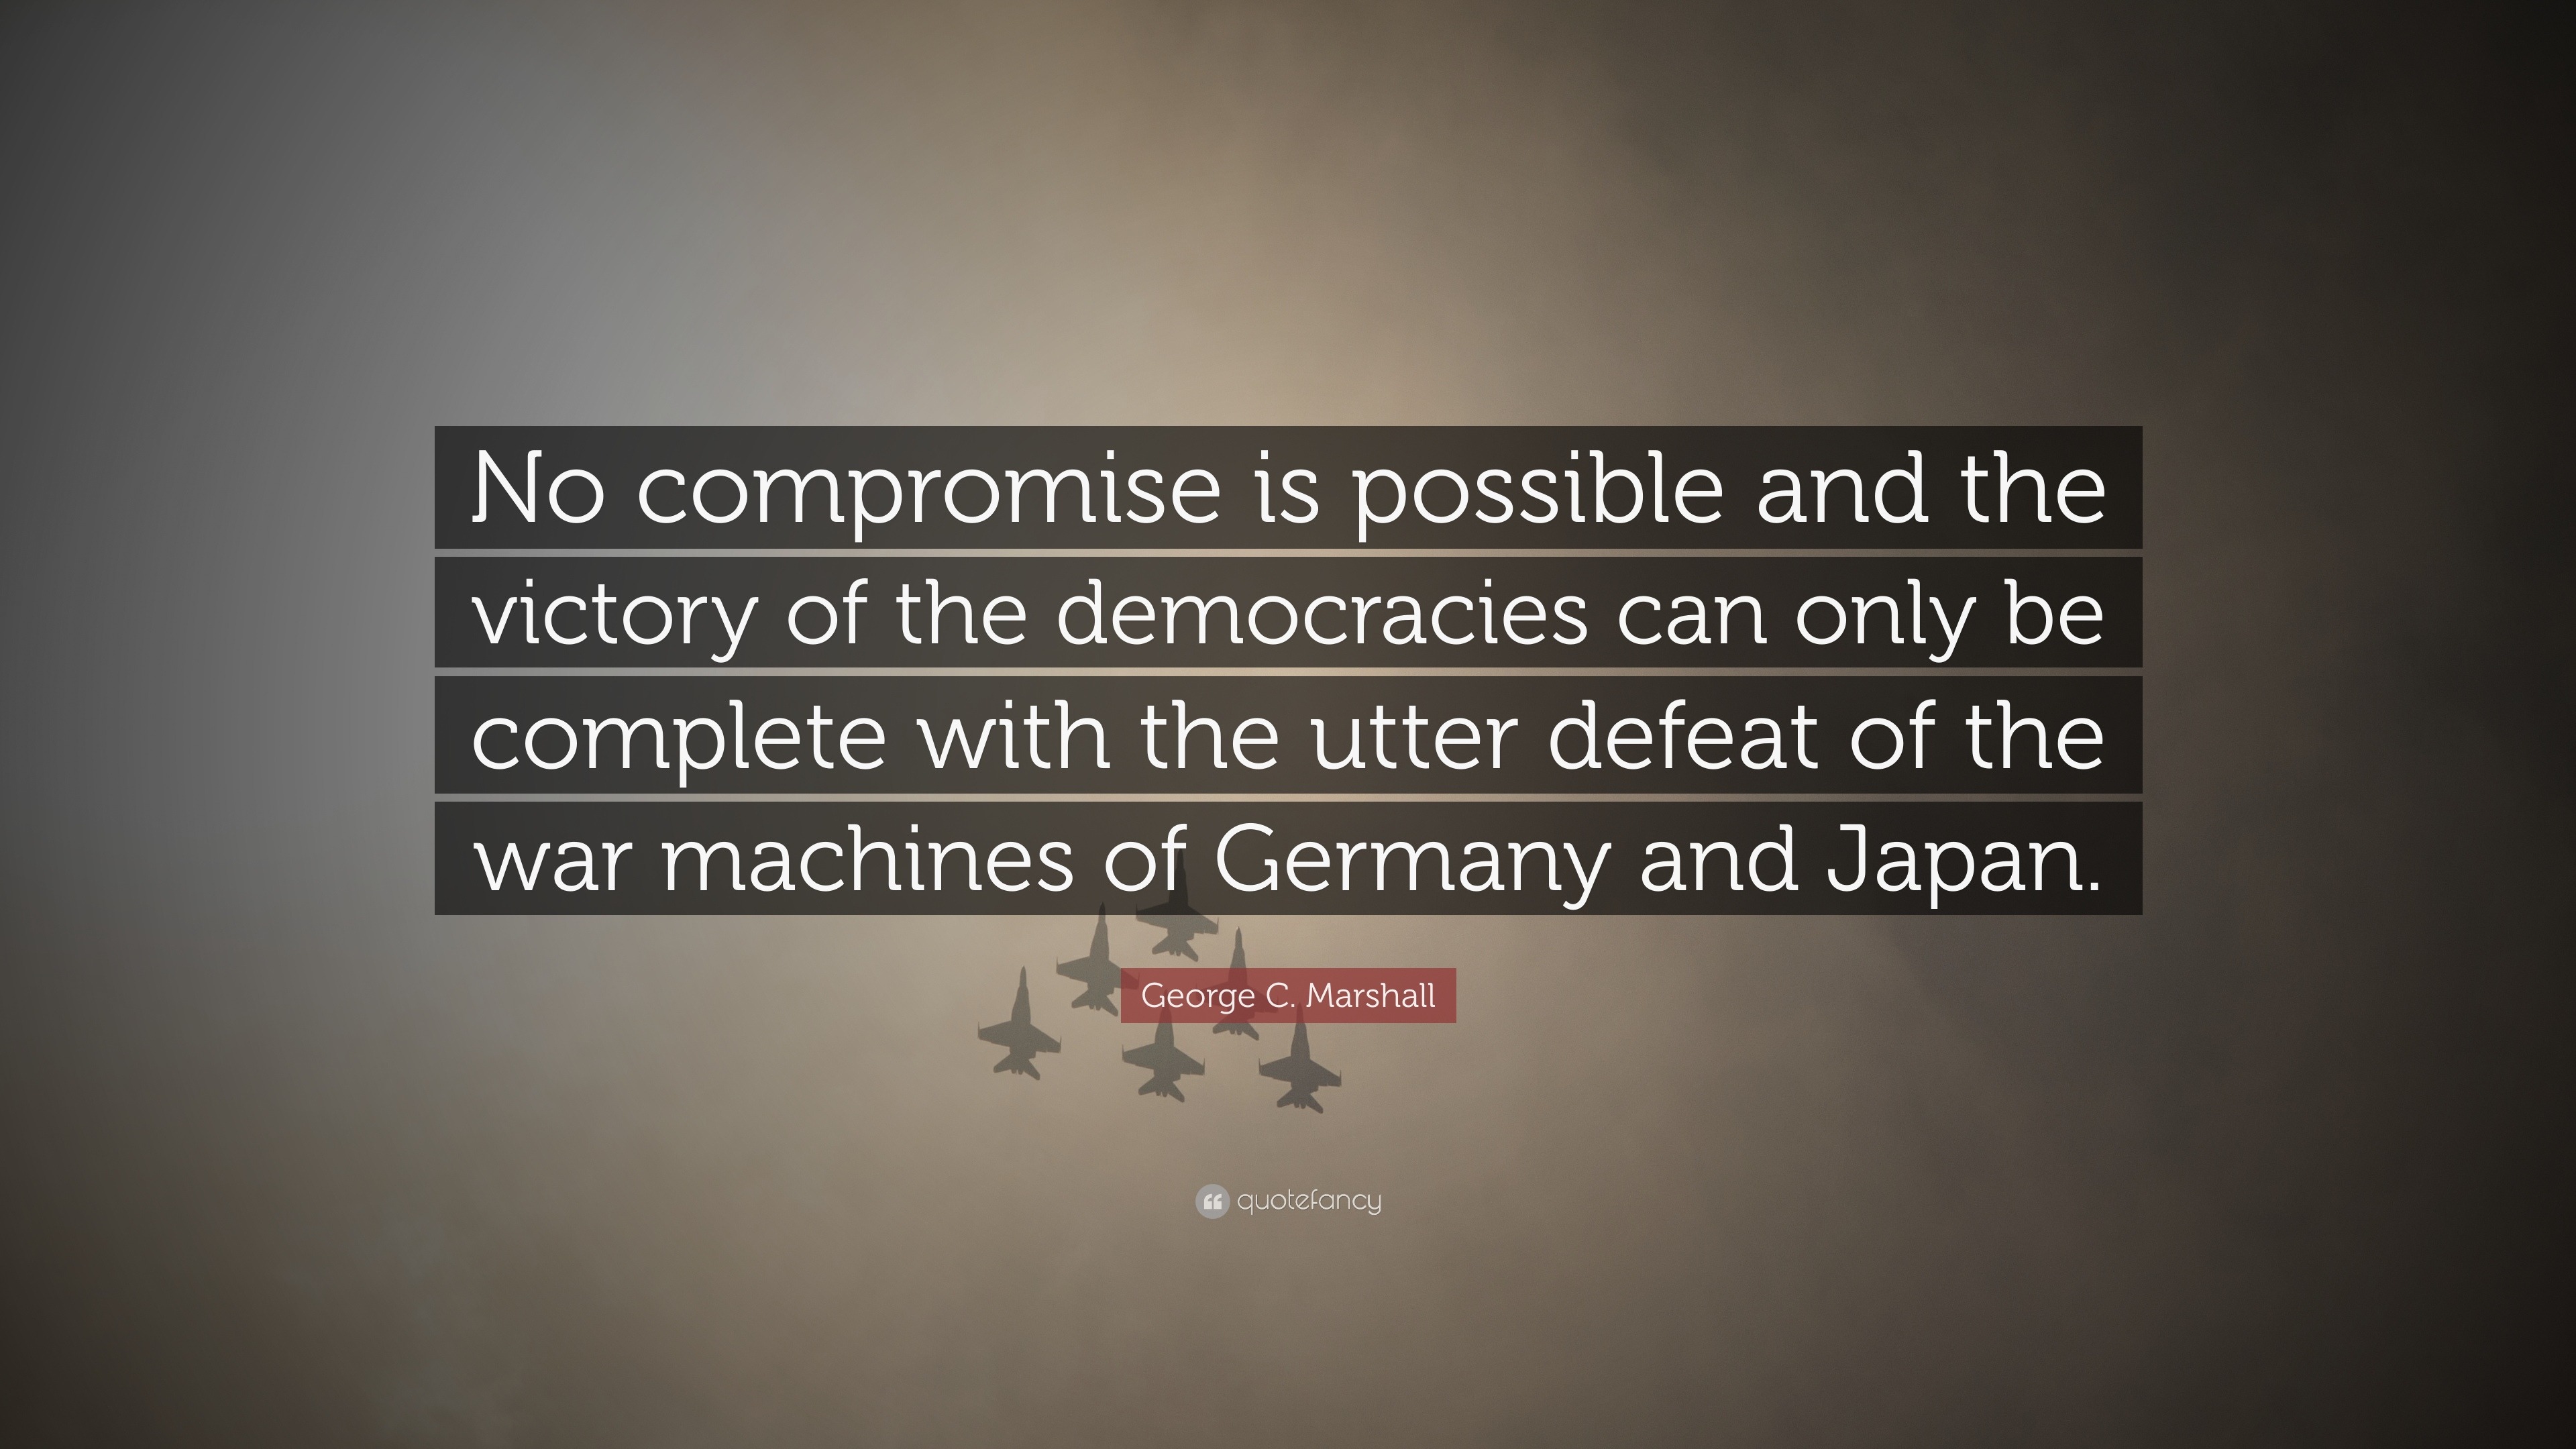 George C. Marshall Quote: “No compromise is possible and the victory of the  democracies can only be complete with the utter defeat of the war machi”